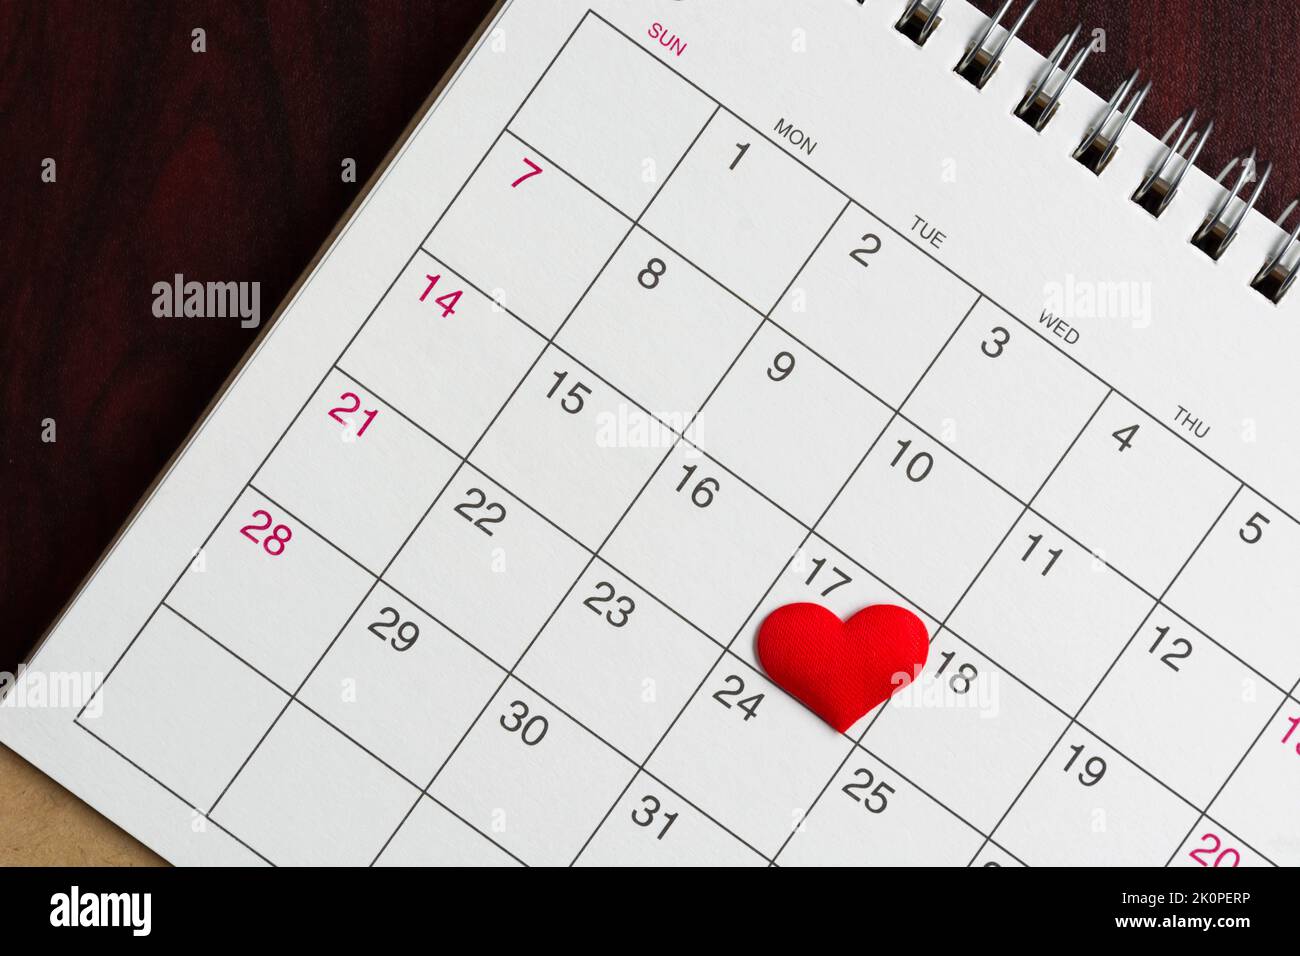 Red heart shape on the date of the 17th day in the calendar. Stock Photo